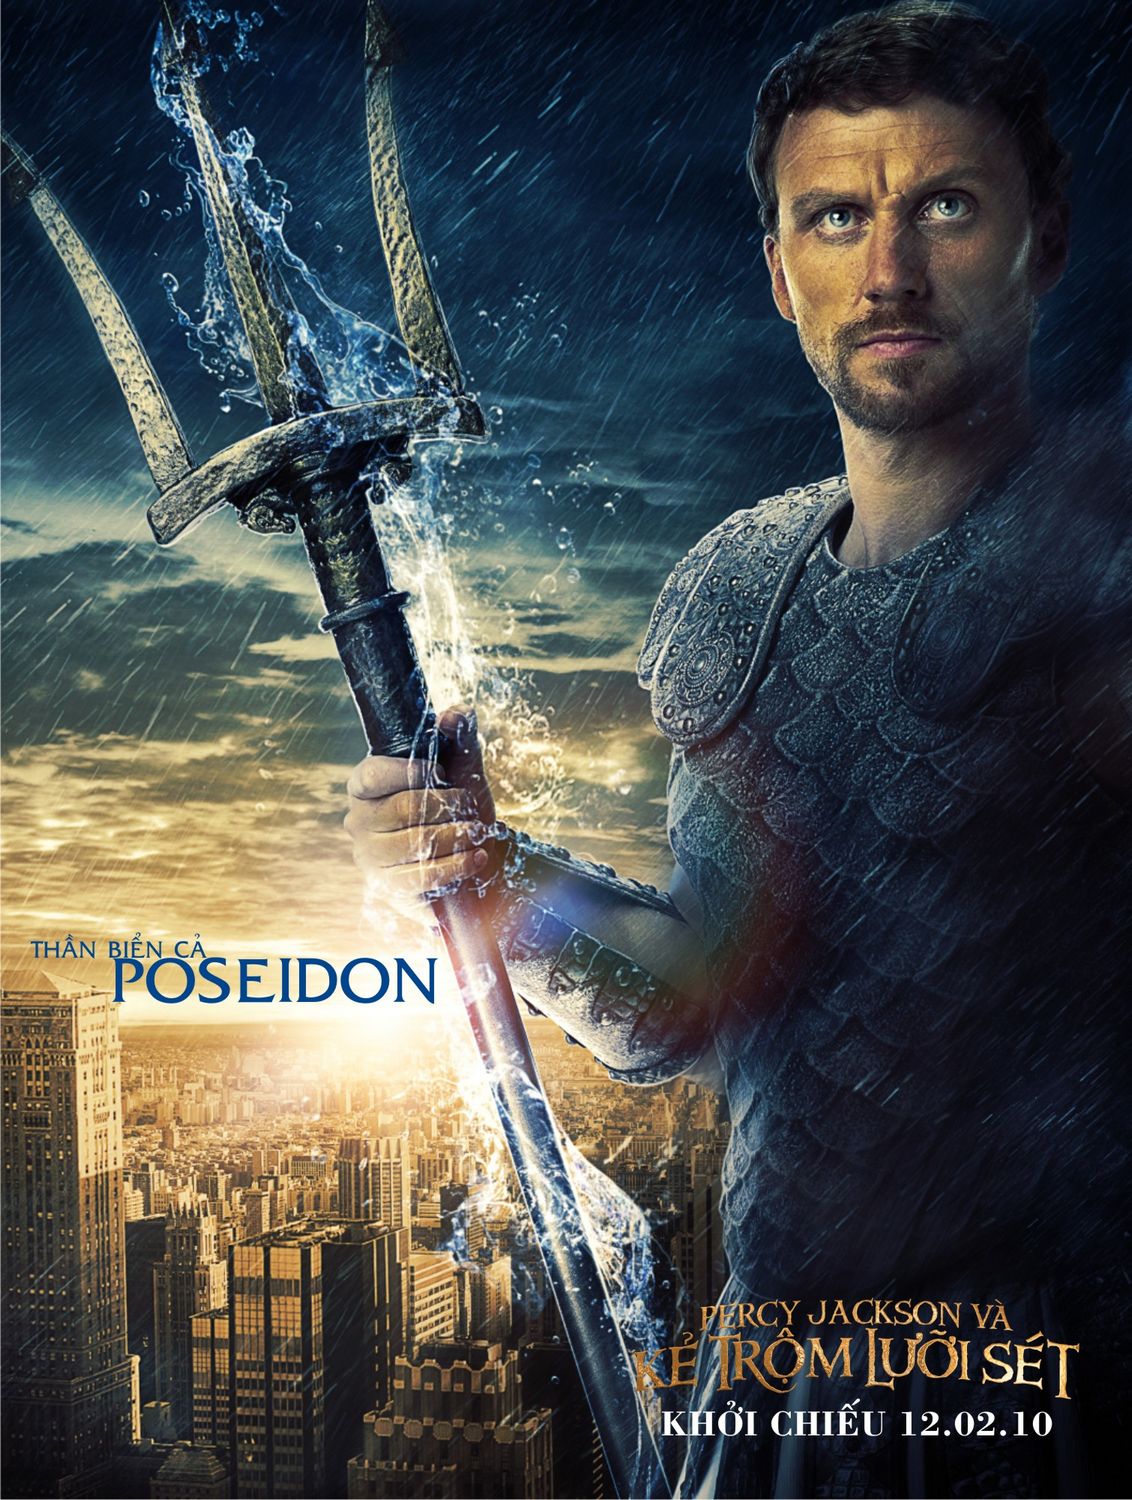 Extra Large Movie Poster Image for Percy Jackson & the Olympians: The Lightning Thief (#14 of 16)